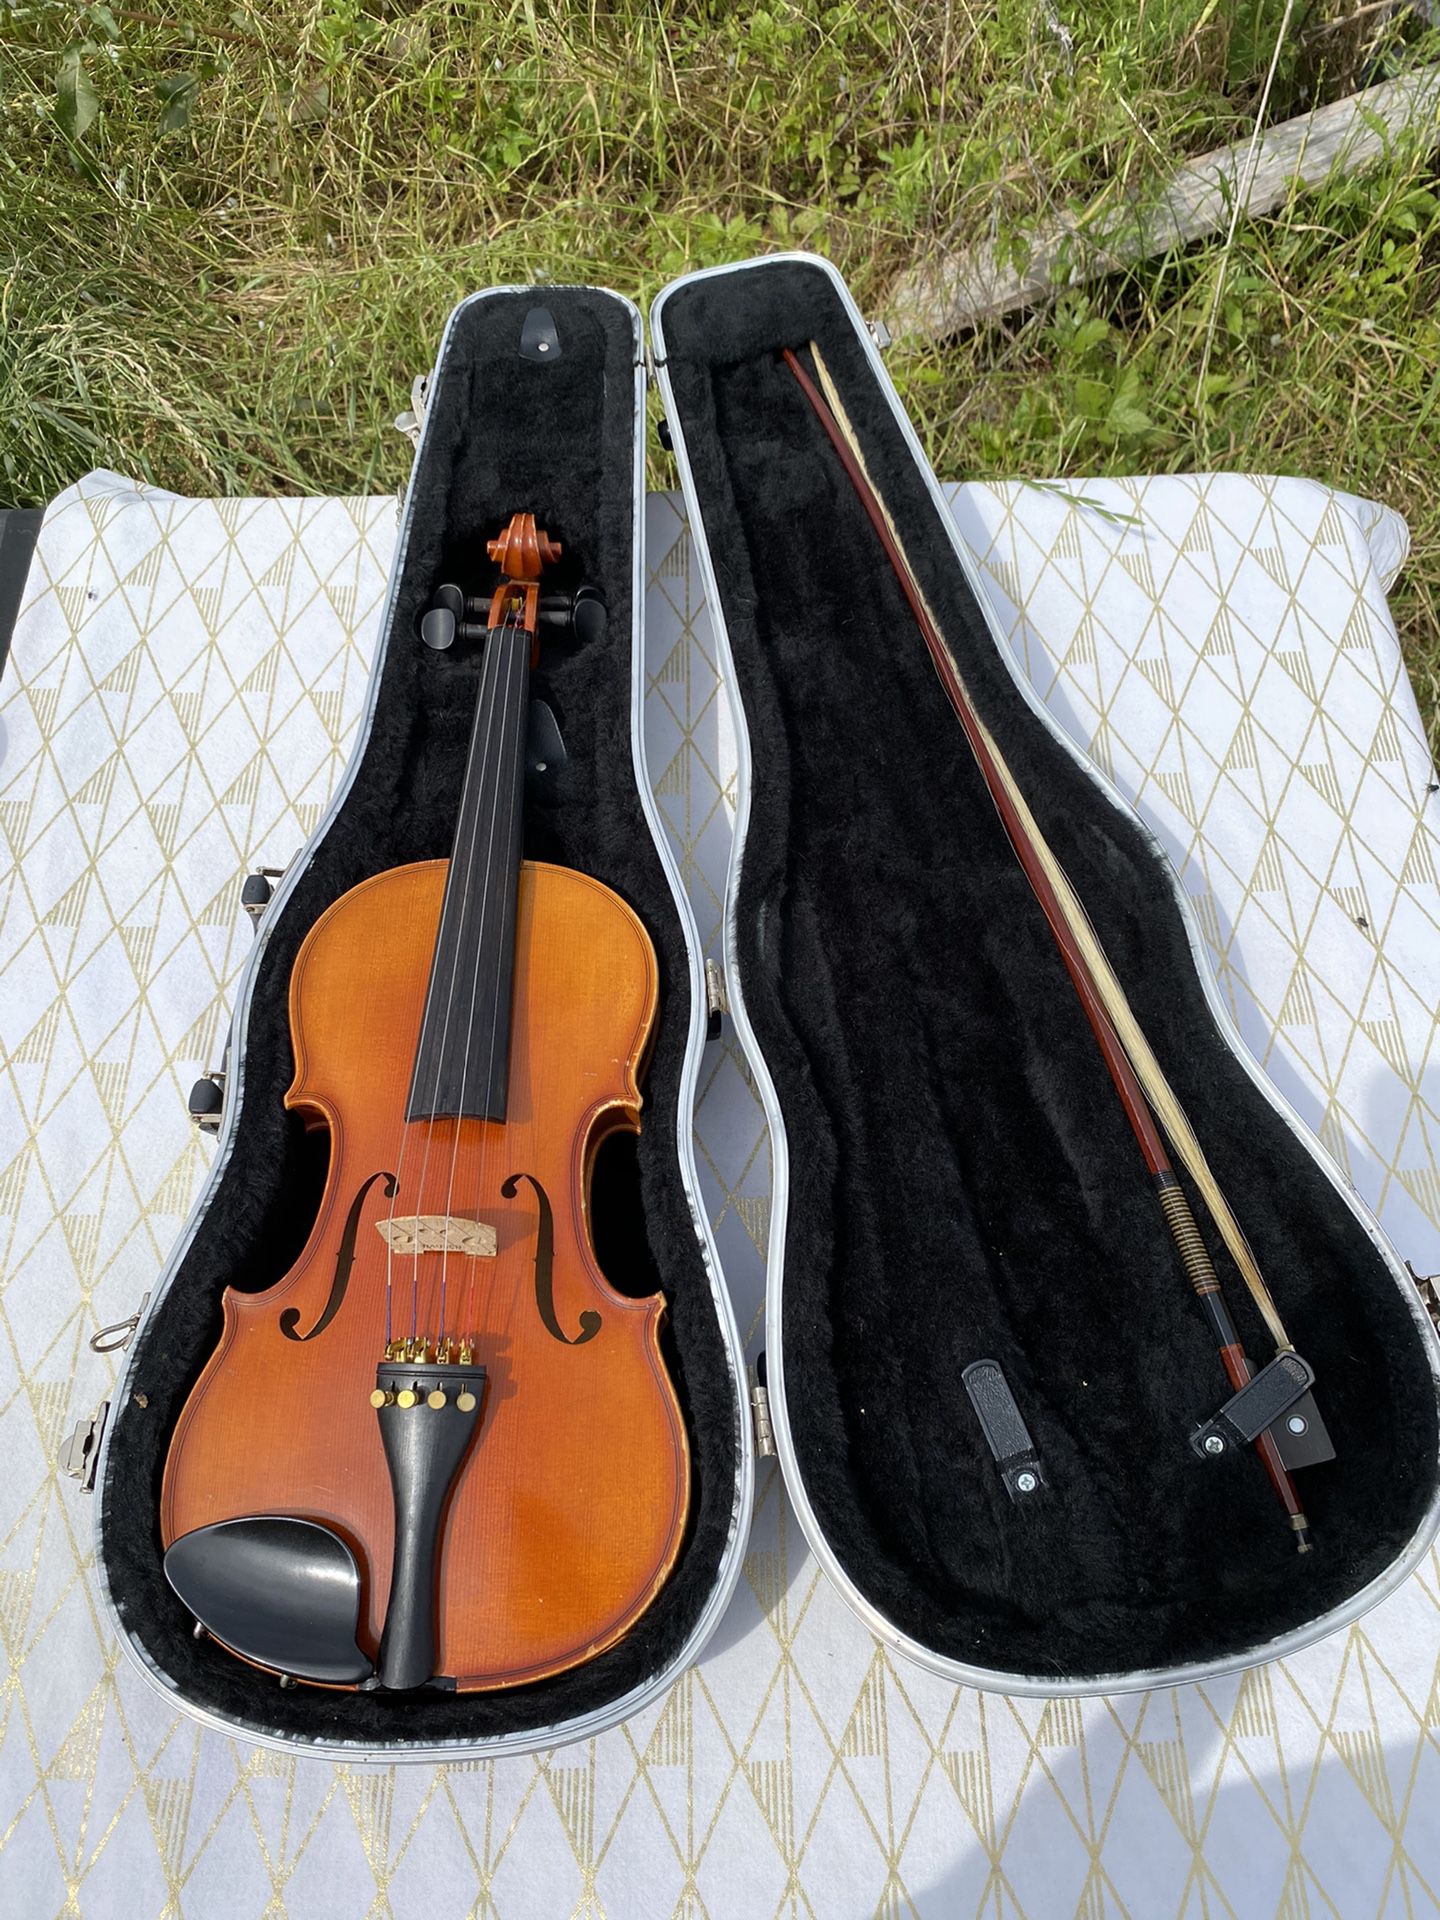 Knilling 4/4 Full Size Violin Made in Germany with Hard Case & Bow